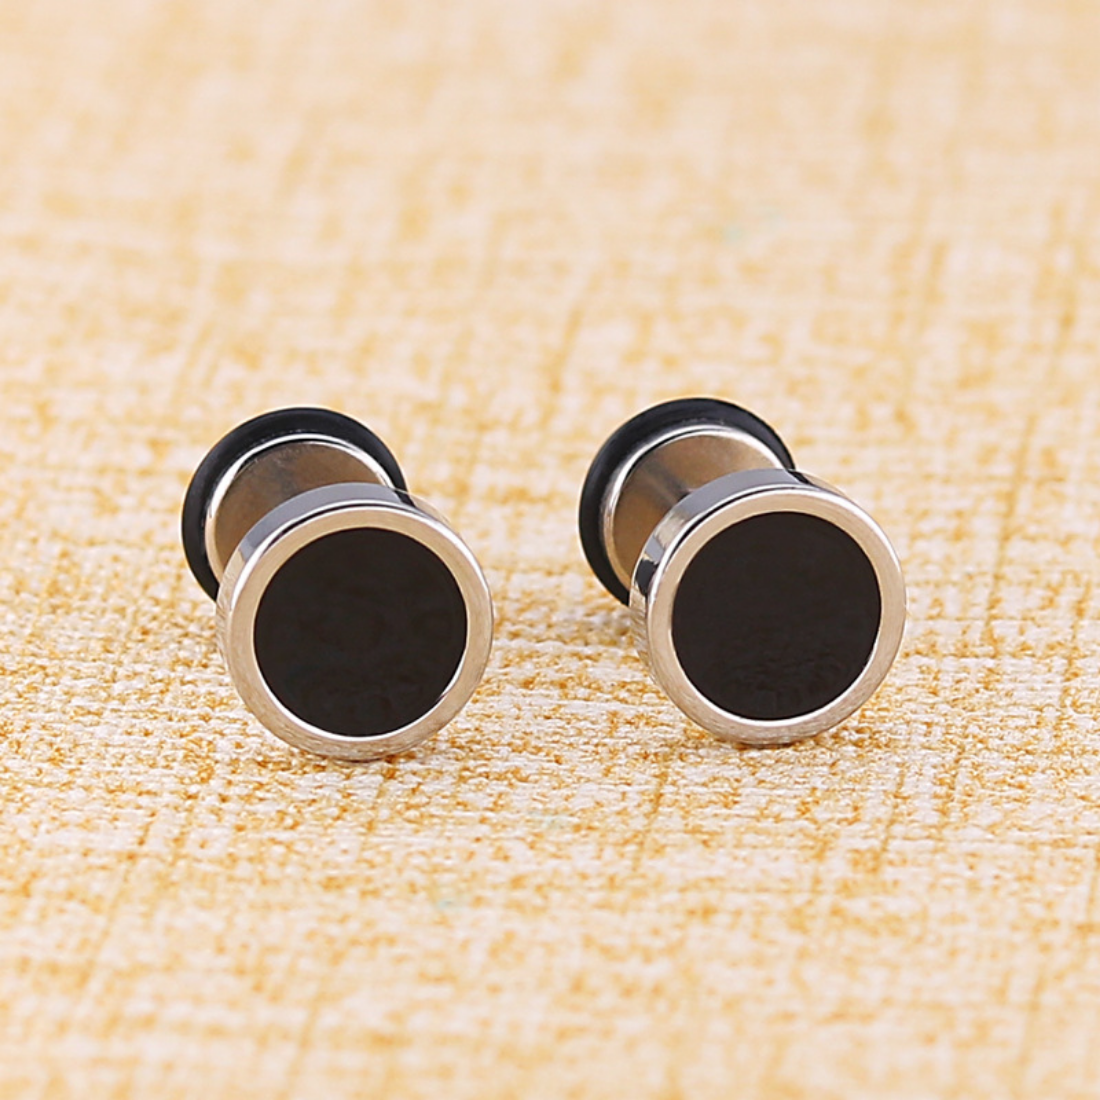 Amazon.com: 8mm Mens Black Stud Earrings Stainless Steel Illusion Tunnel  Plug Screw Back with Carbon Fiber, 2pcs: Clothing, Shoes & Jewelry